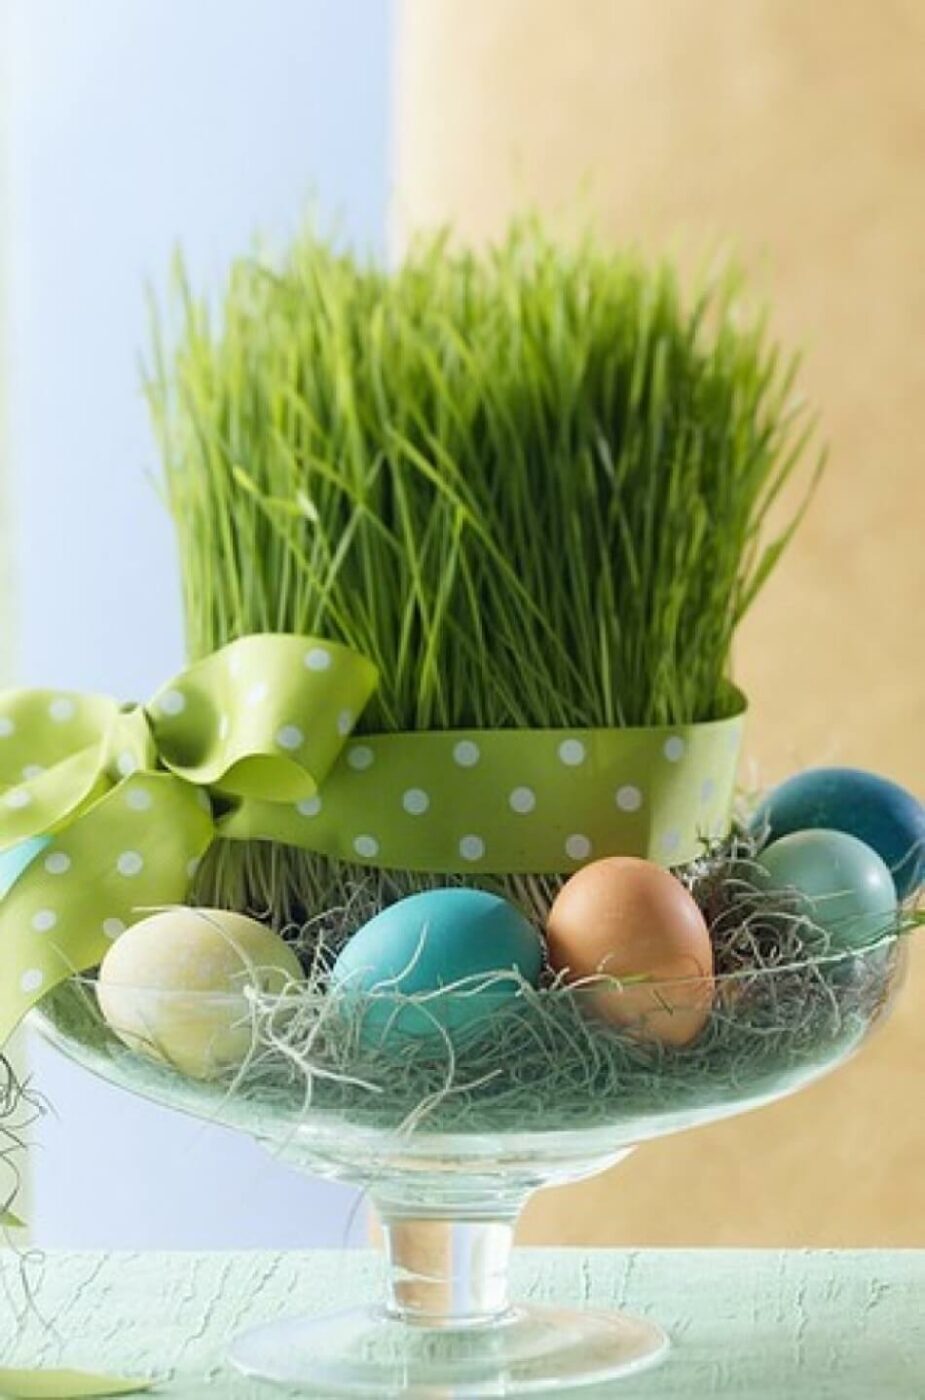 The Grass Is Always Greener Easter Egg Dish.